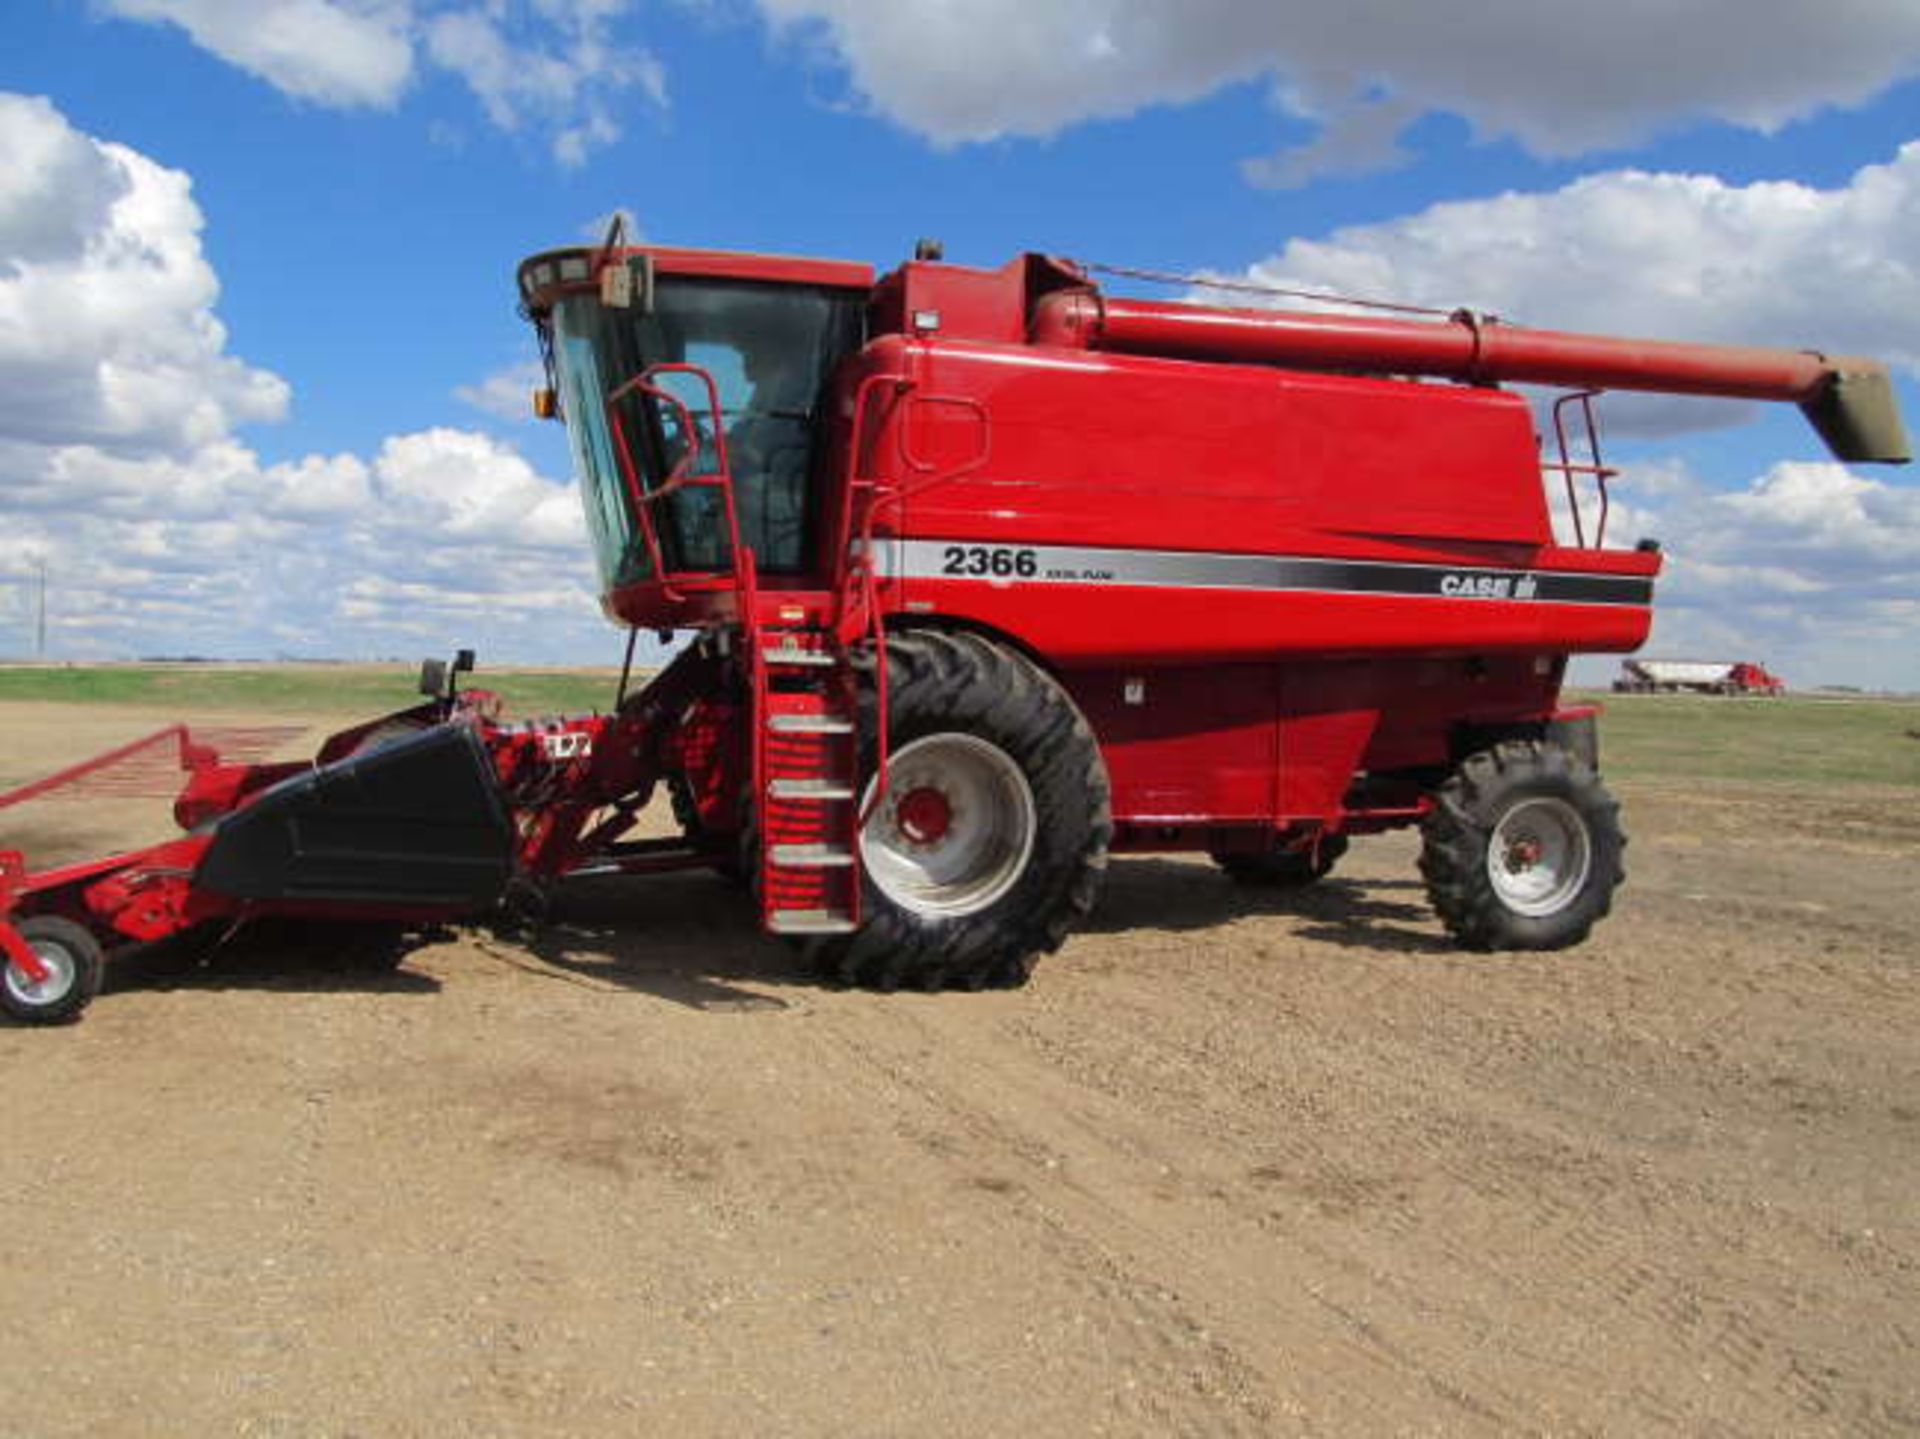 CASE IH 2366 AXIAL FLOW SP COMBINE; 987/1286 Rotor/Engine Hours, Case IH 1015 Pick-up Header, SN- - Image 3 of 5